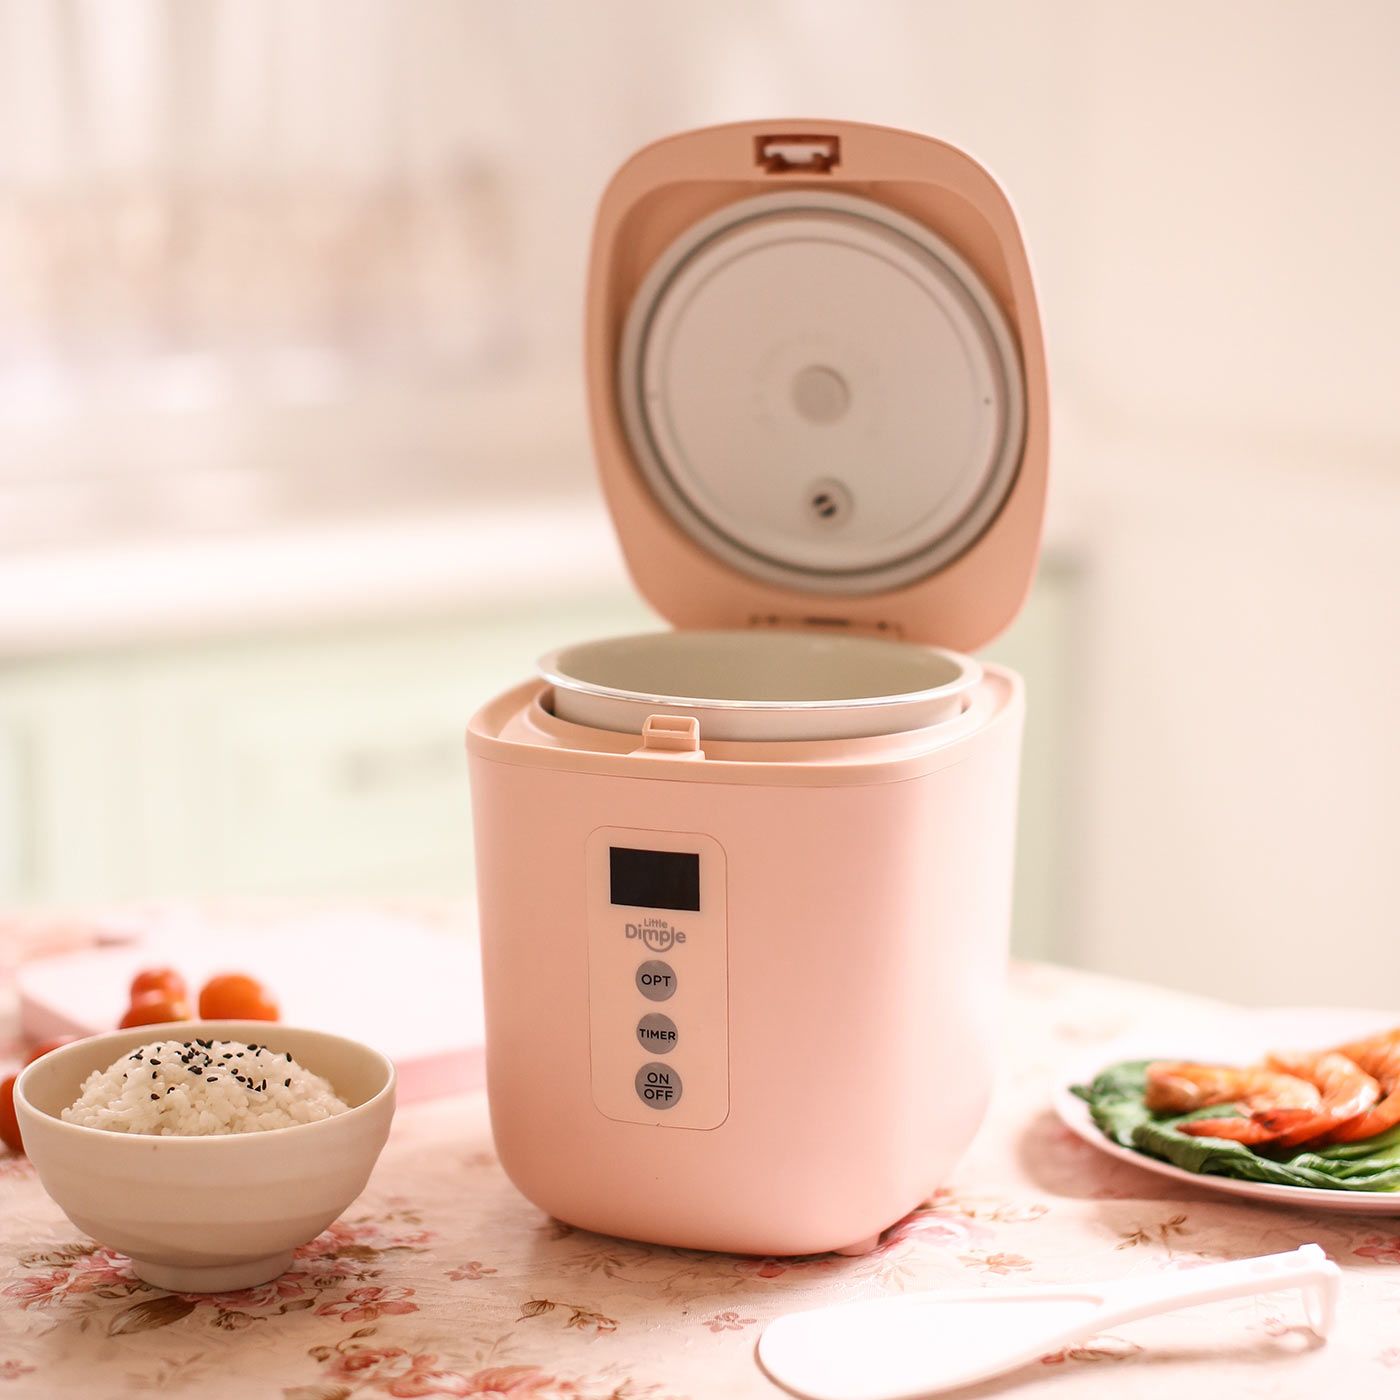 Little Dimple Mini Rice Cooker Pink - 4